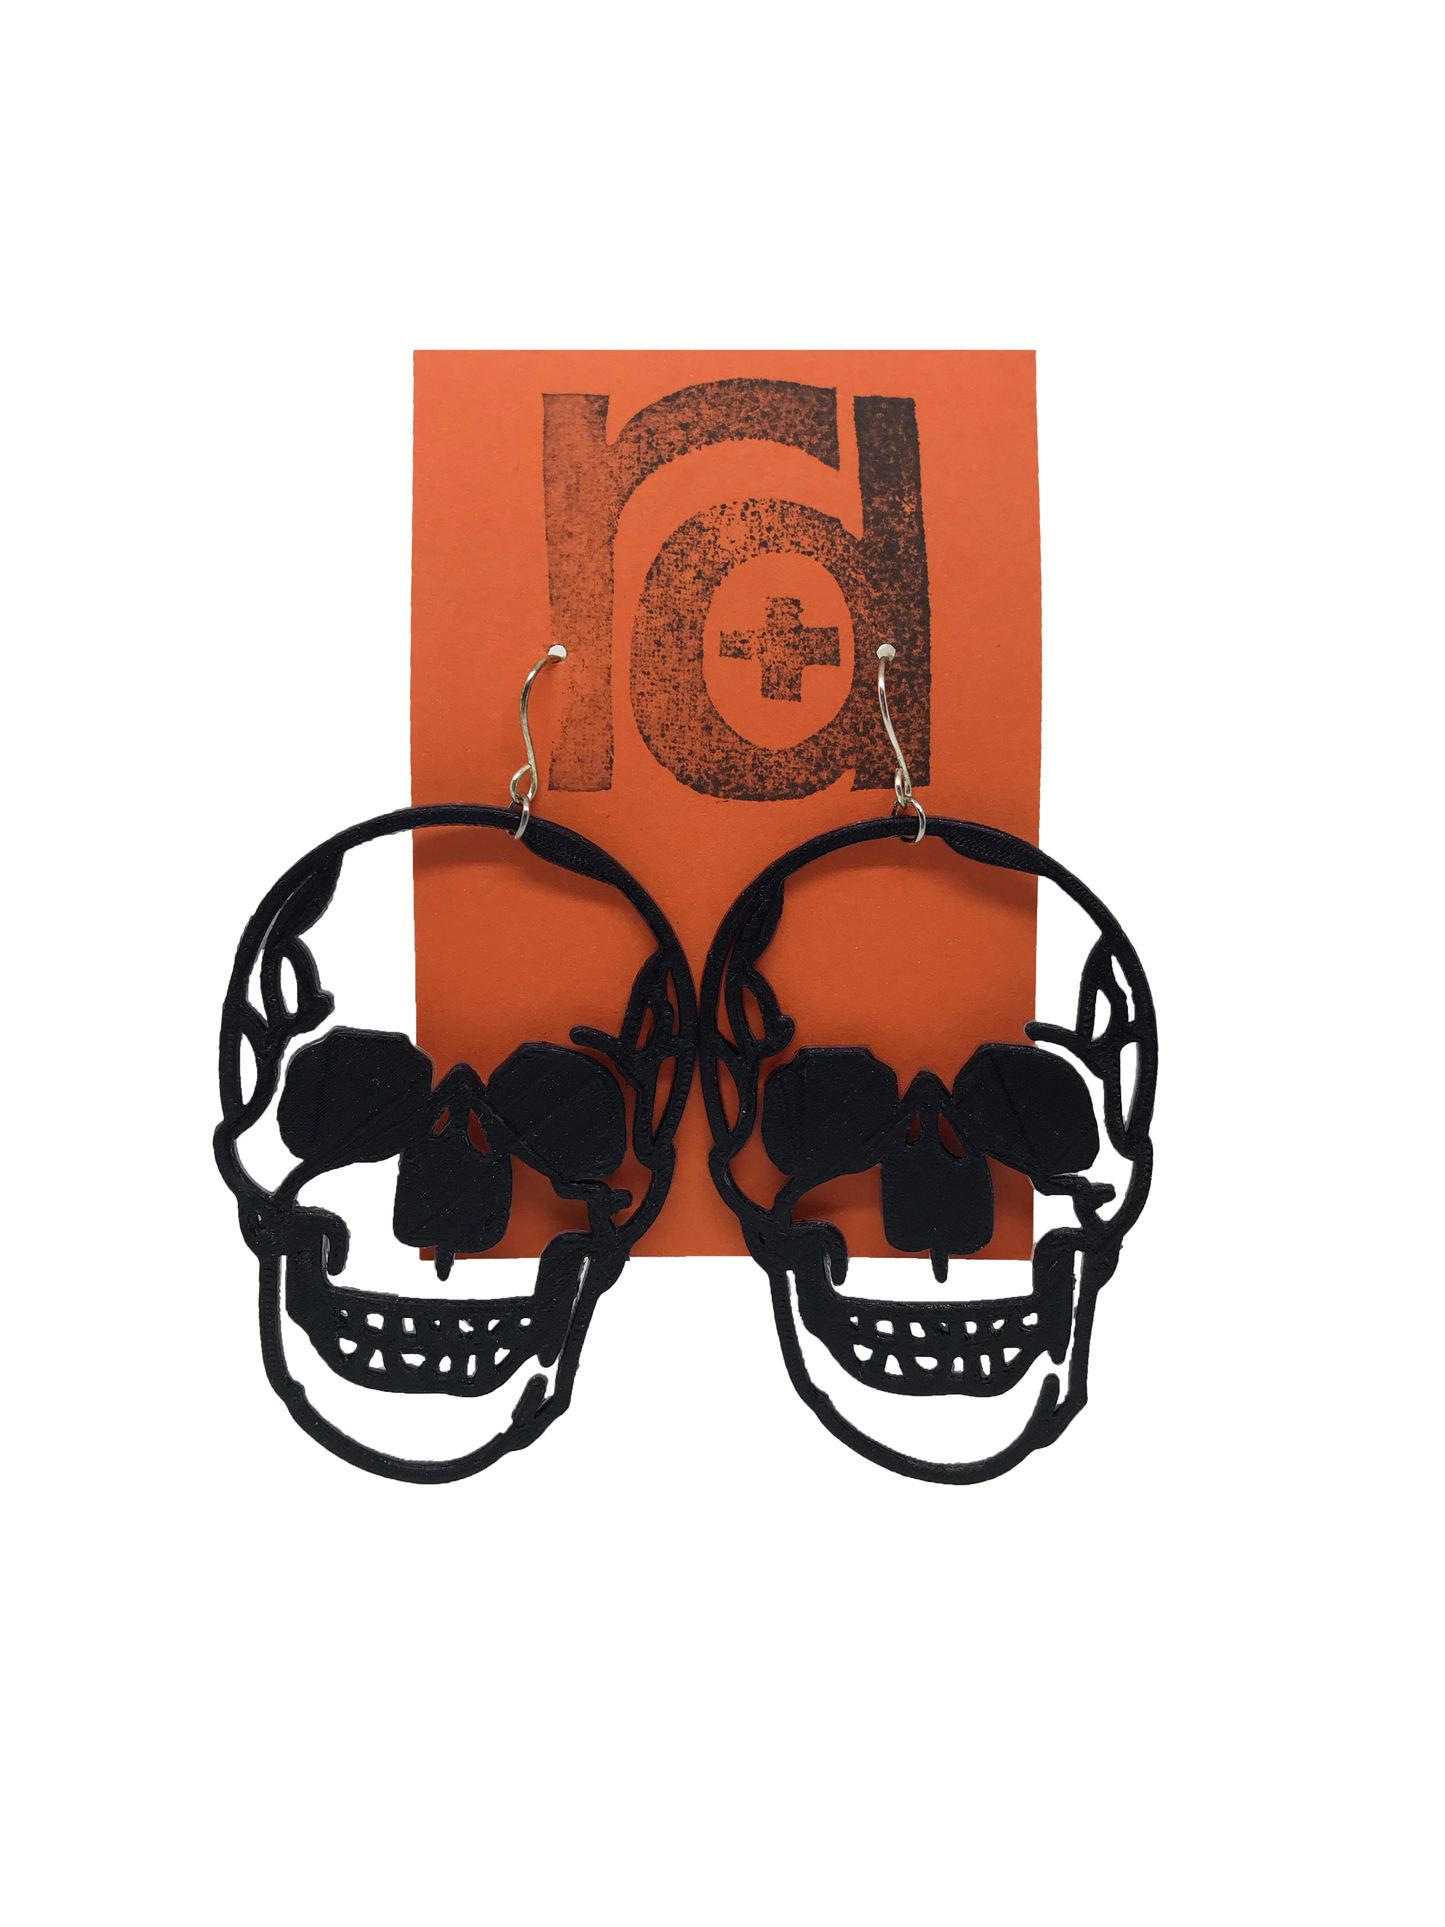 Shown on a orange earring card are two large skull earrings. They are realistic in their shape and are blacked out for the eyes and nose with a jaw that looks like it could be smiling.